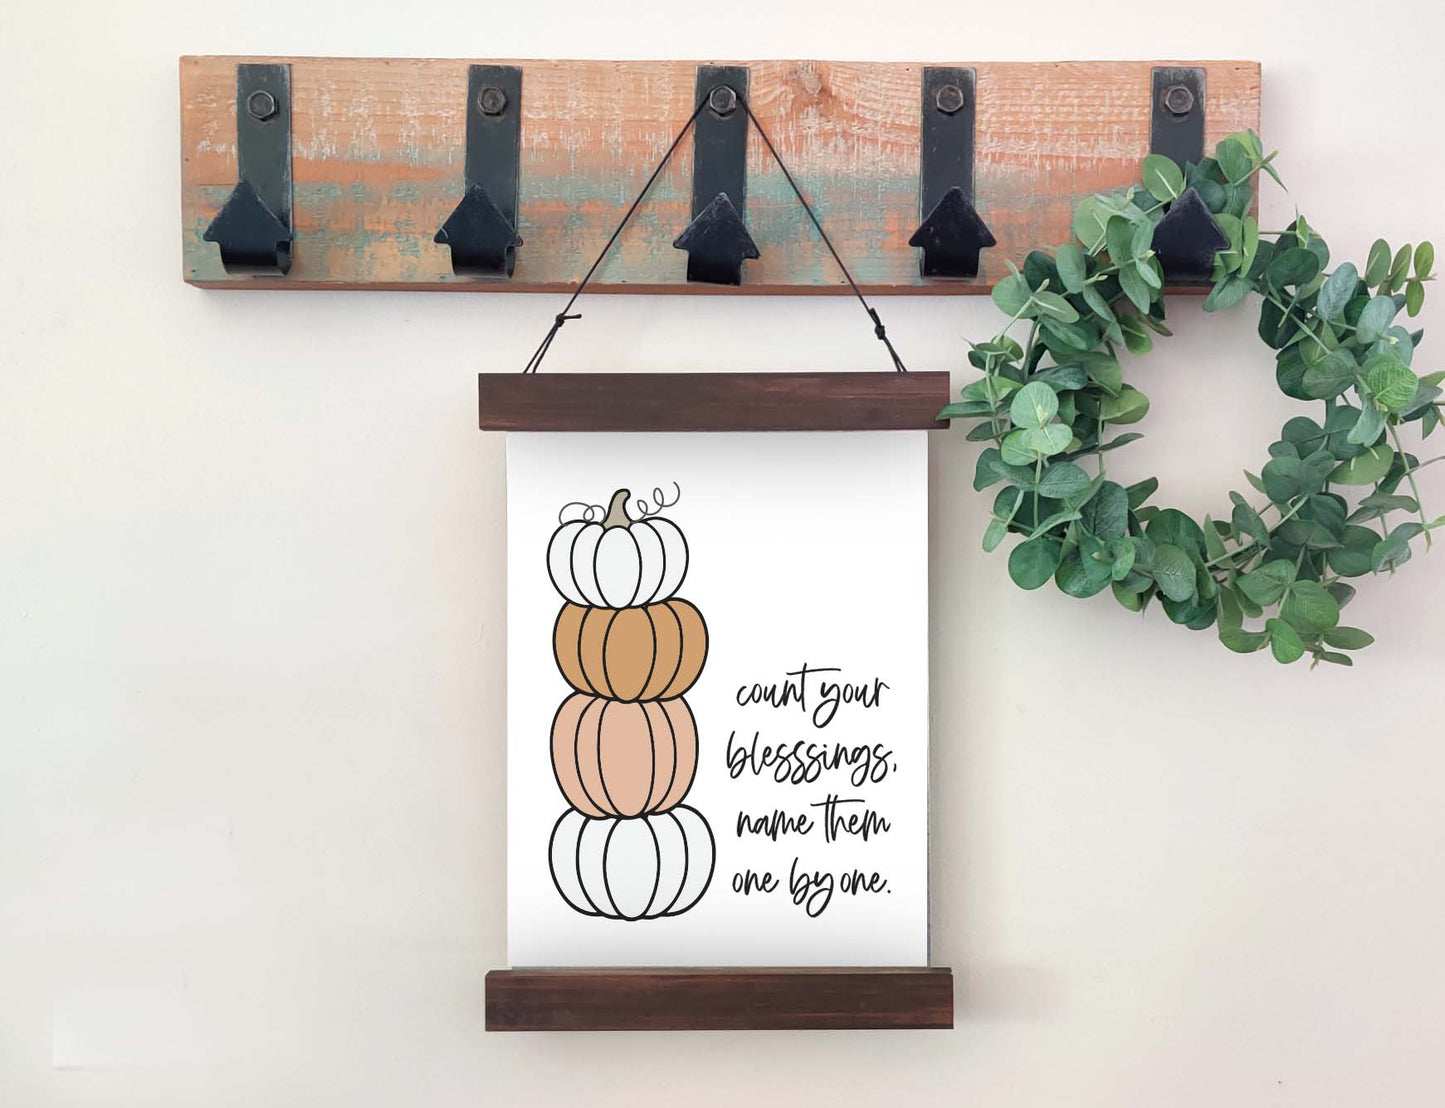 Magnetic Wall Hanging Insert: Count Your Blessings (Thanksgiving/Fall) | INSERT ONLY